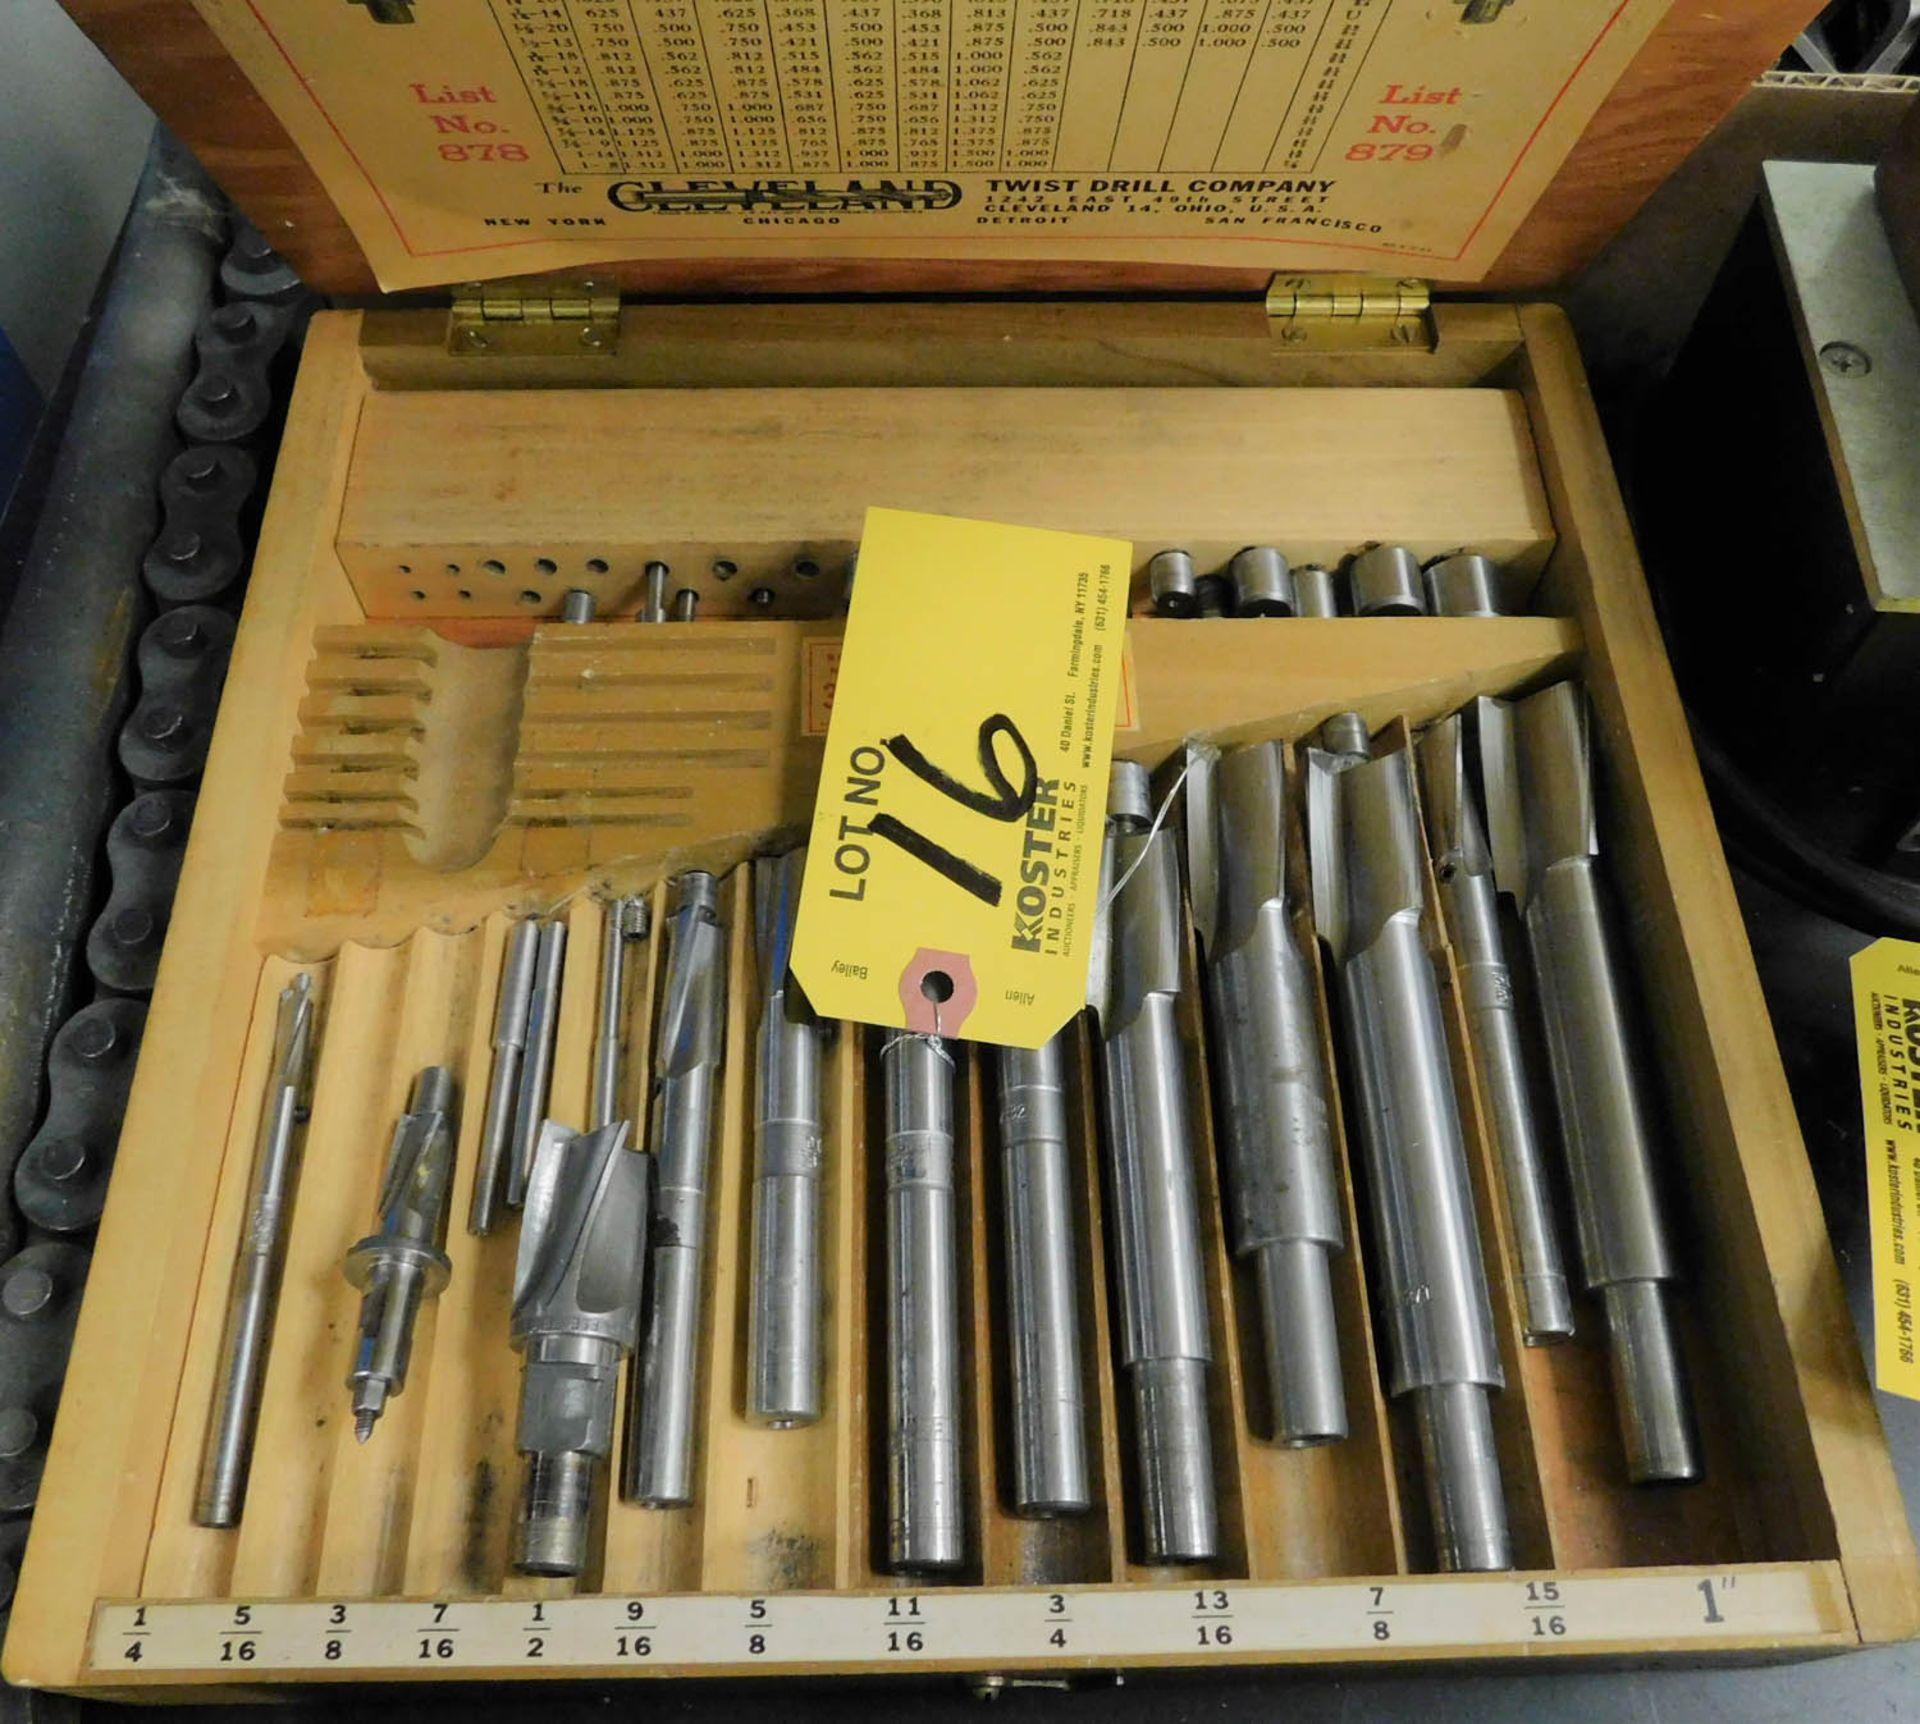 CLEVELAND COUNTER BORE SET [LOCATED AT 2455 SOUTH ROAD (ROUTE 9), POUGHKEEPSIE, NY]